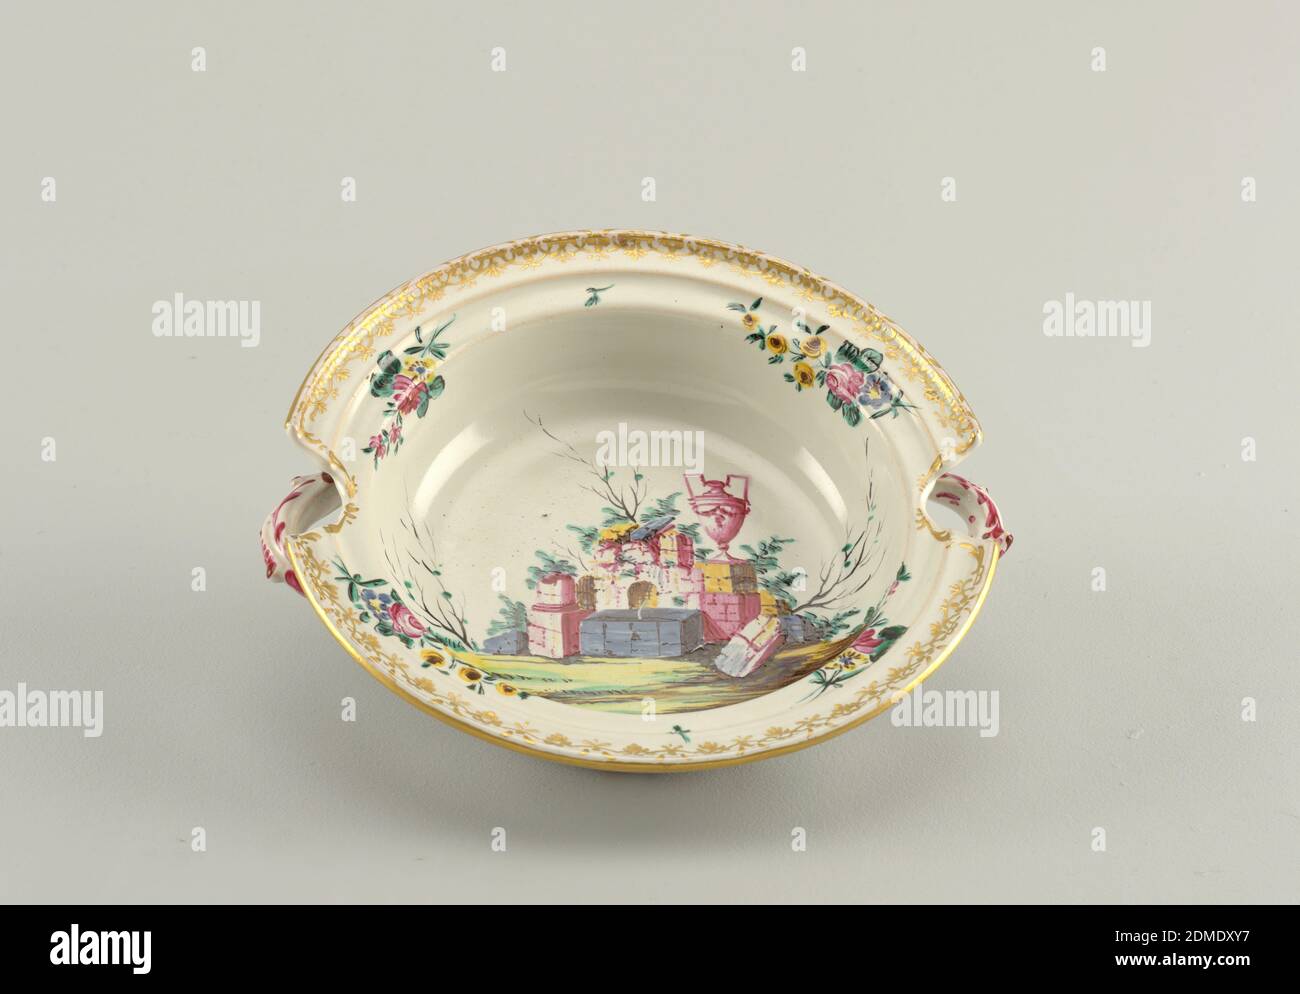 Dish, Gilded tin-glazed earthenware, Floral bouquets and gilding at rim. At center, ruins in a landscape. Cut-outs above molded handles., Italy, ca. 1770, ceramics, Decorative Arts, Dish Stock Photo